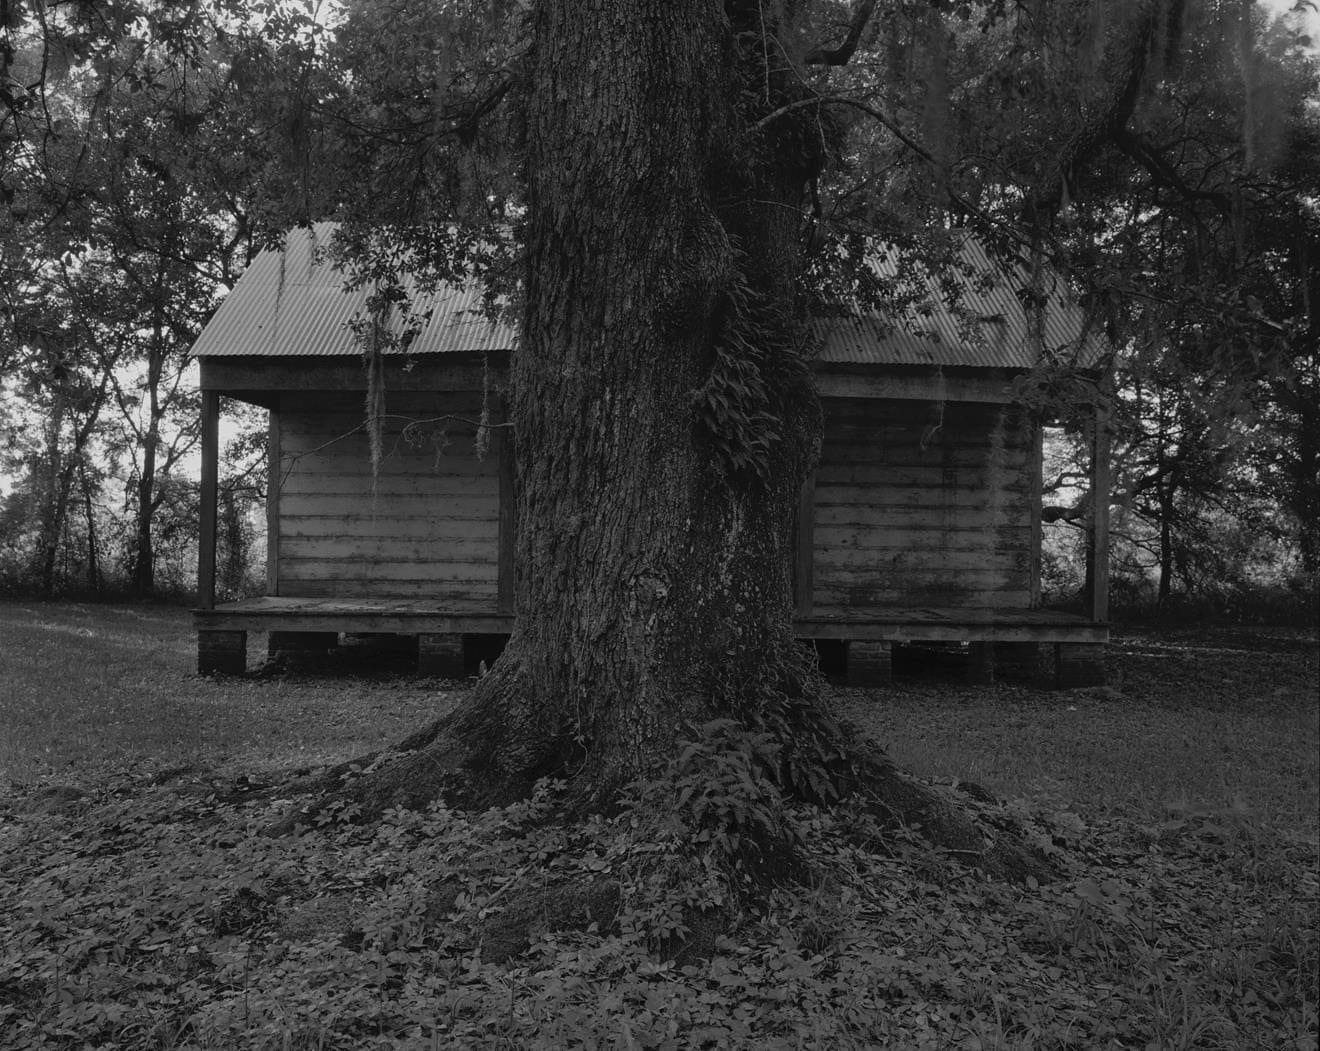 Dawoud Bey, Tree and Cabin, 2019, gelatin silver print, paper: 48 x 59 inches (121.9 x 149.9 cm), edition of 6 with 2 APs © Dawoud Bey Courtesy: Sean Kelly, New York © Dawoud Bey Courtesy: Sean Kelly, New York